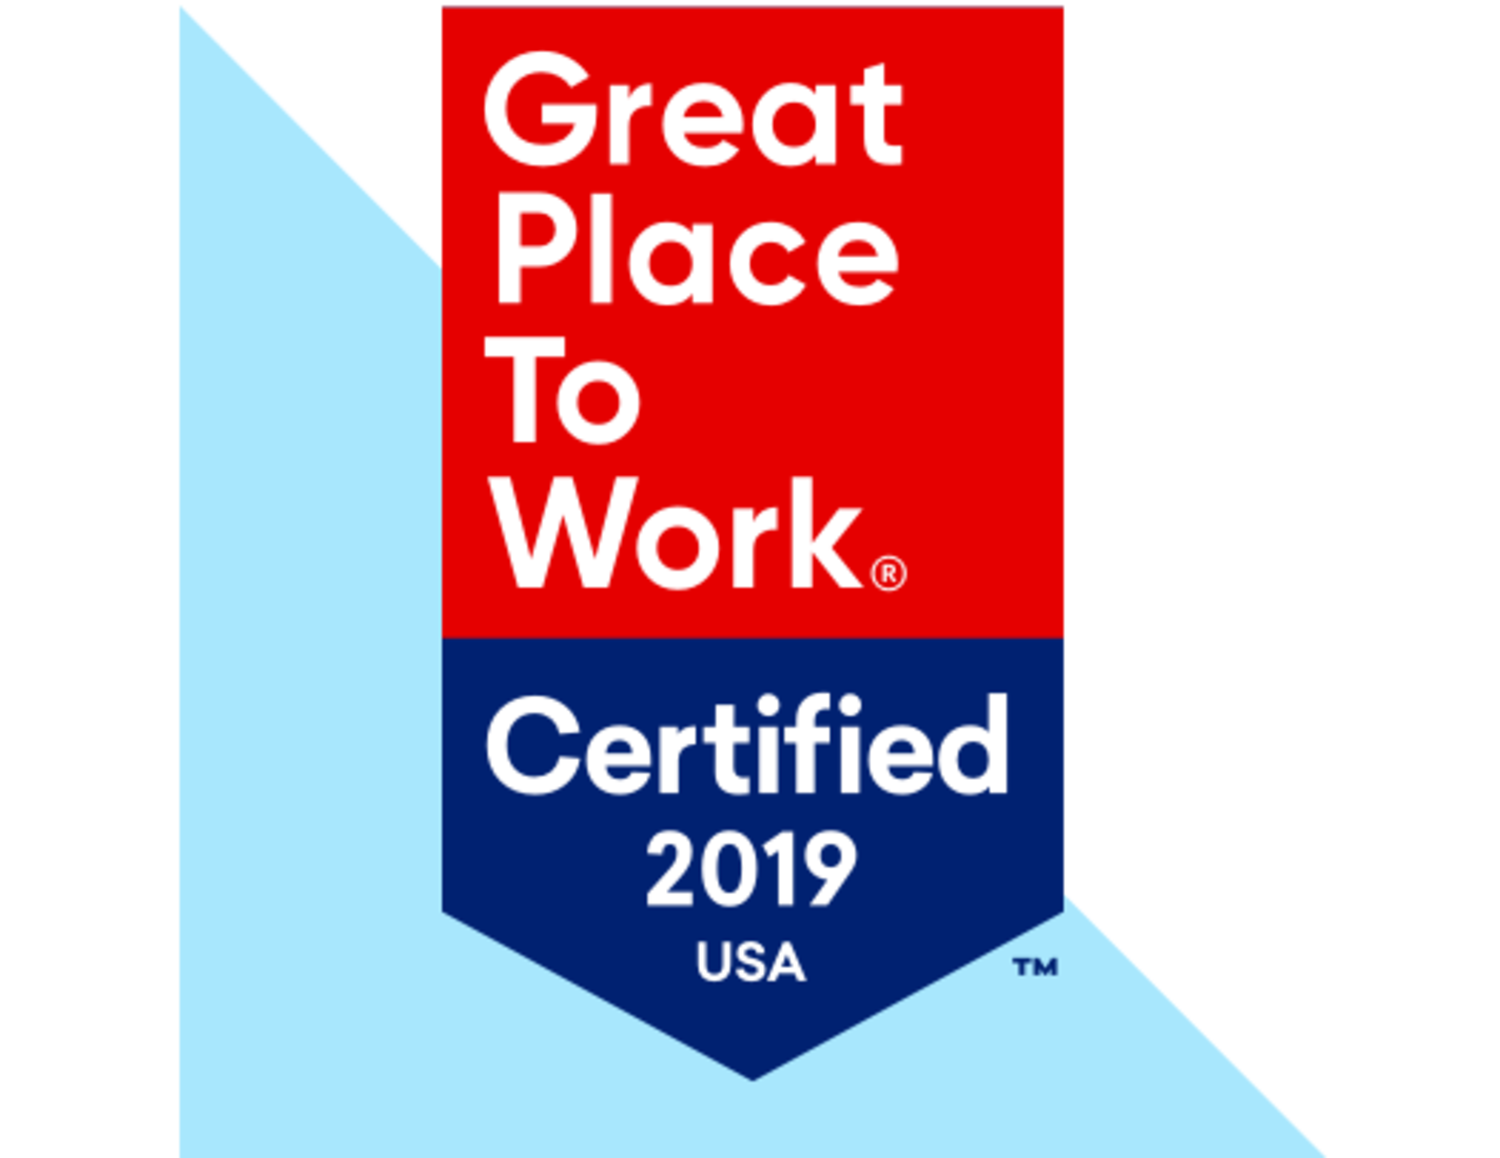 Certification - Great Place To Work United States